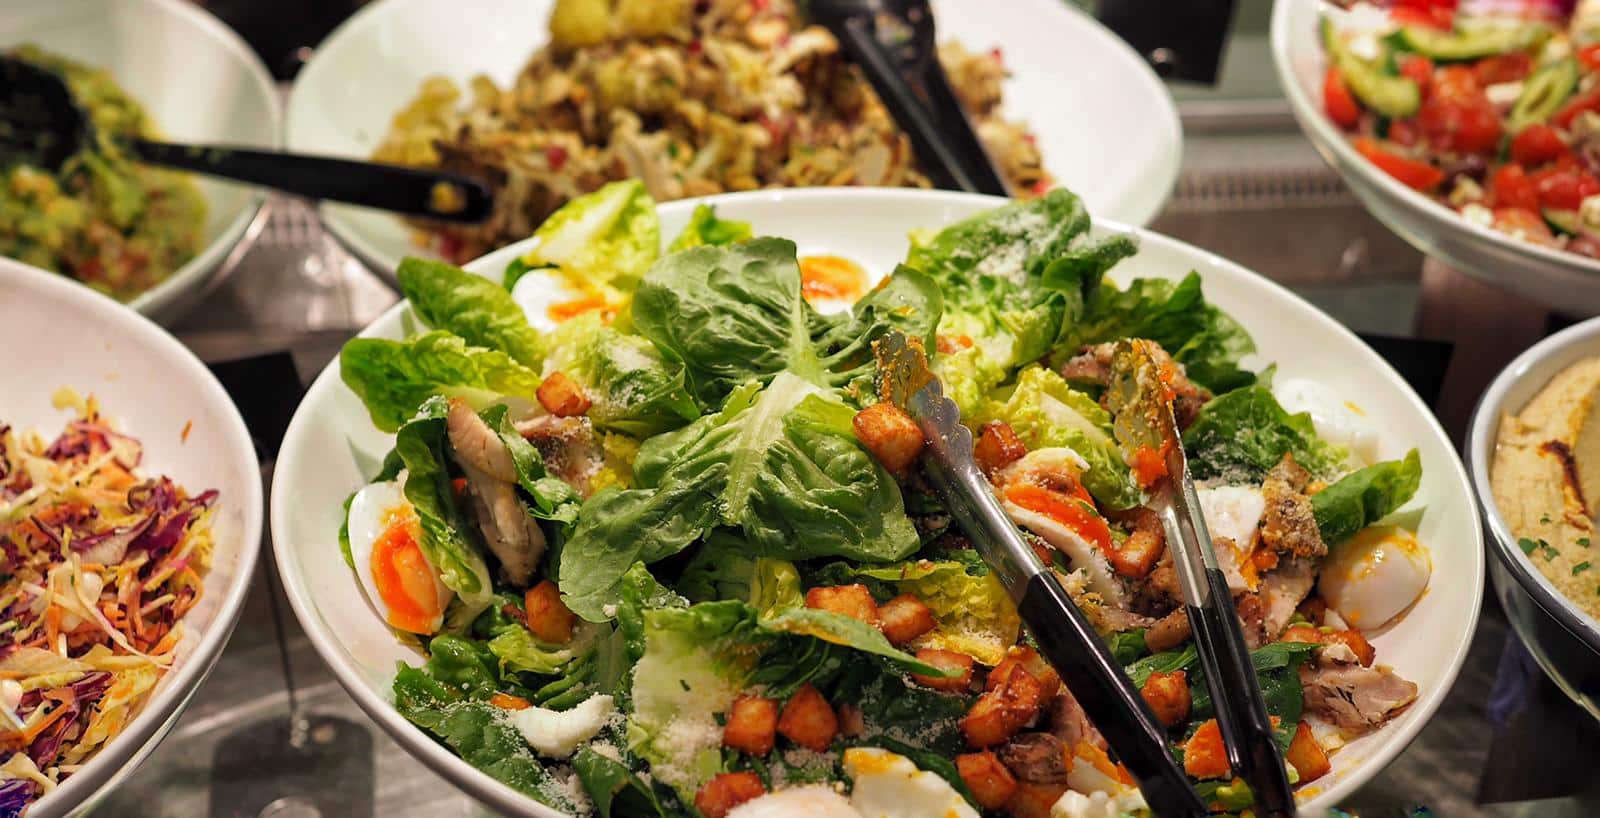 salads at Panzer's can now be bought online